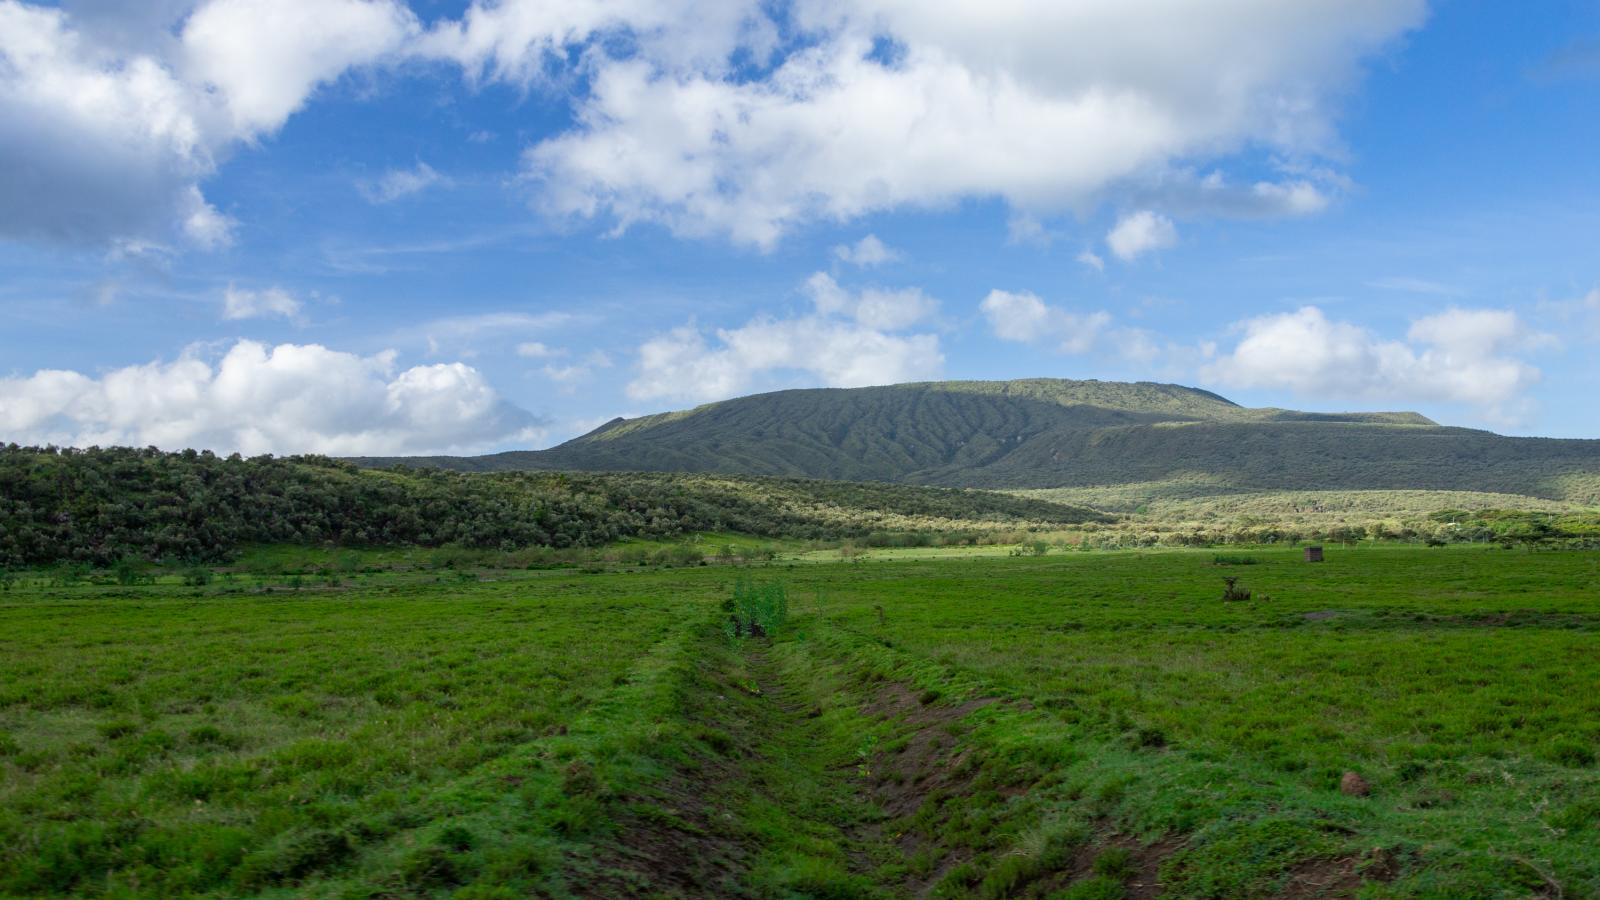 view of mount longonot just after entering Olongonot national park